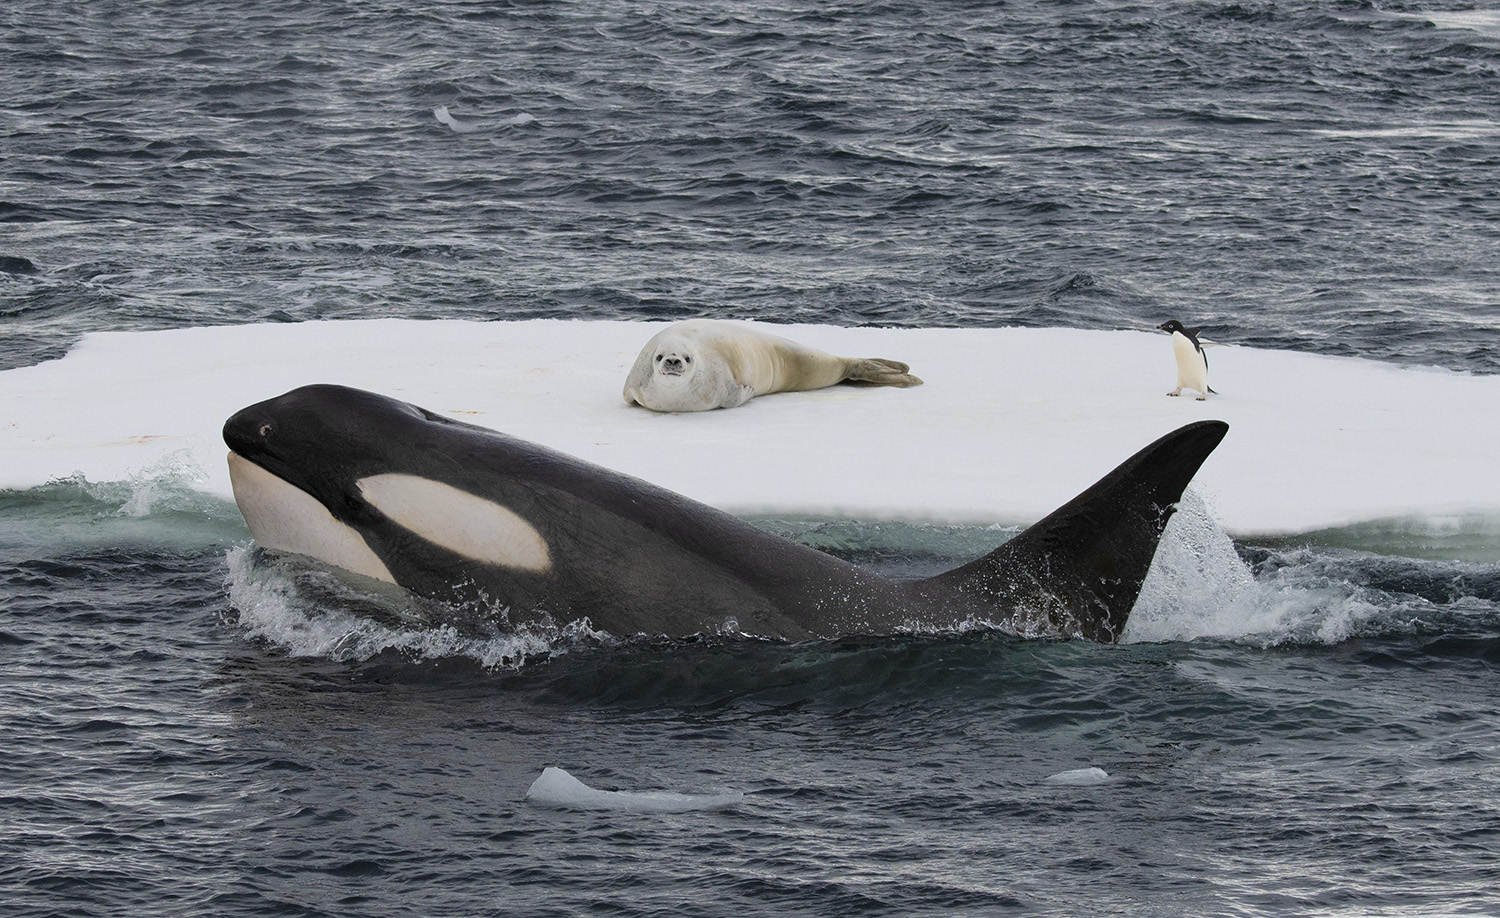 A Killer Whale swims around an ice flow with a Crabeater Seal and penguin on the ice.